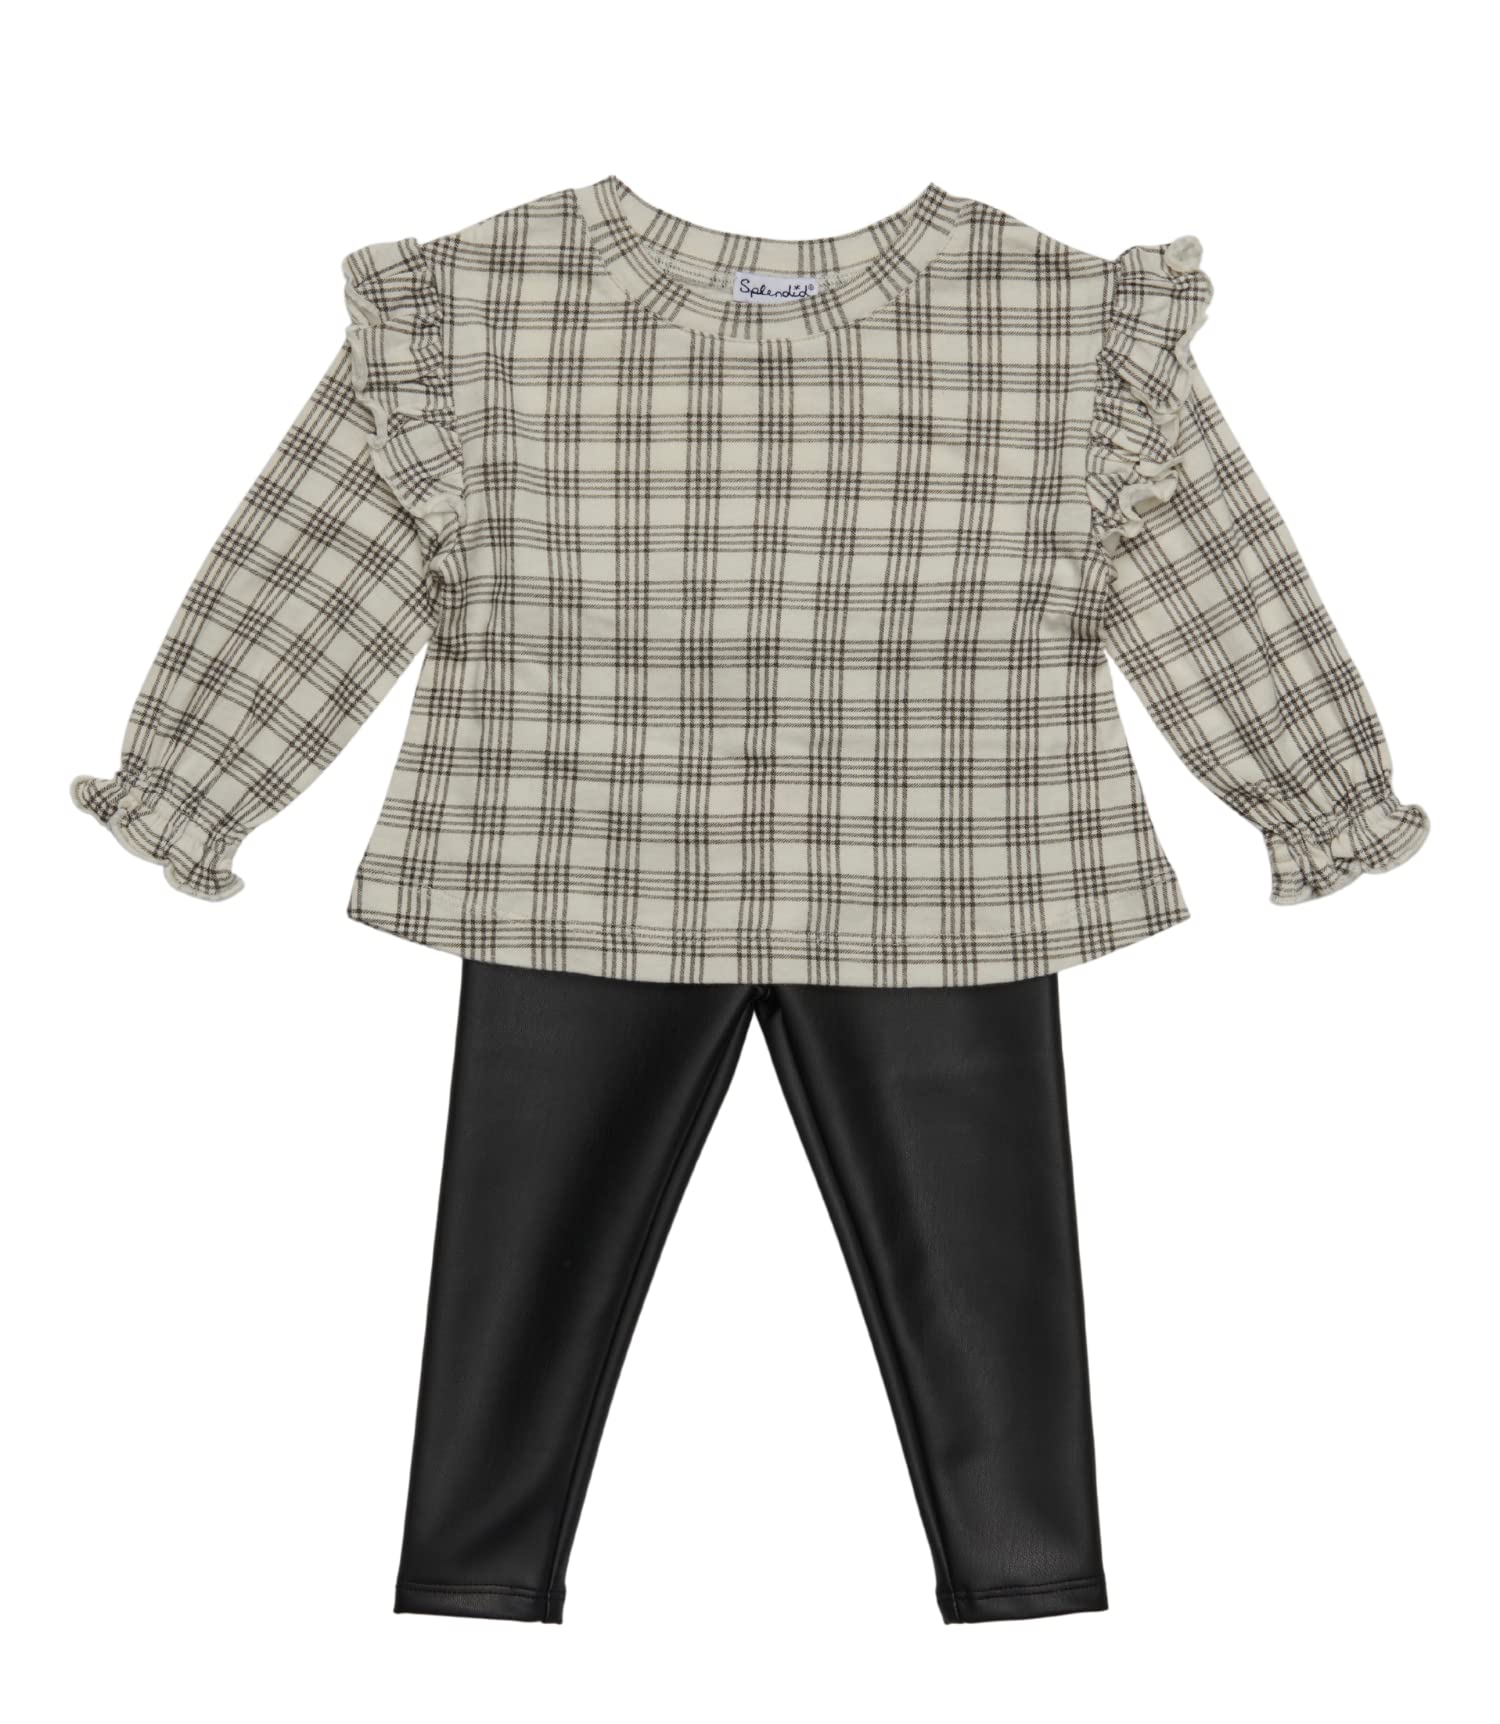 Splendid Baby Girls Long Sleeve, Ruffled Shoulder and Cuff, Checkered Print Top and Leather Legging